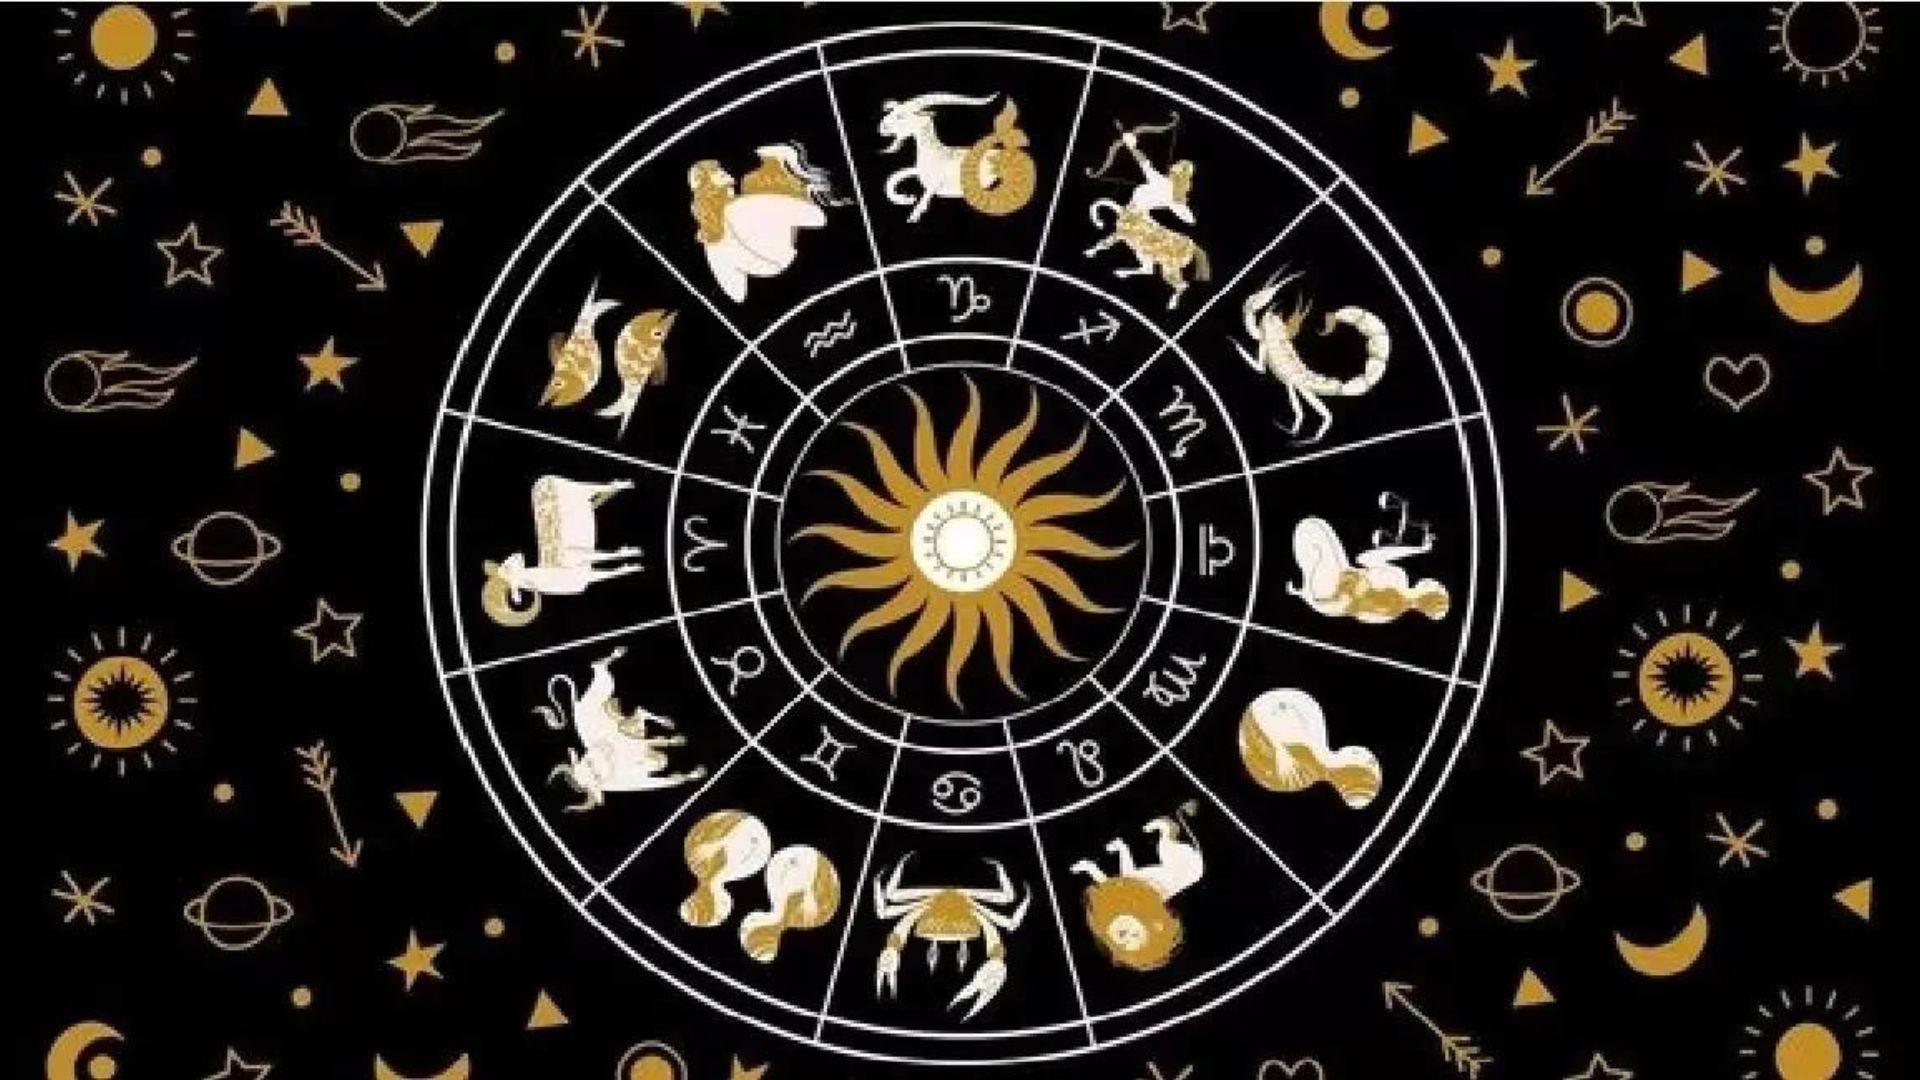 Zodiac Sings And Animals In Circle With Black Background